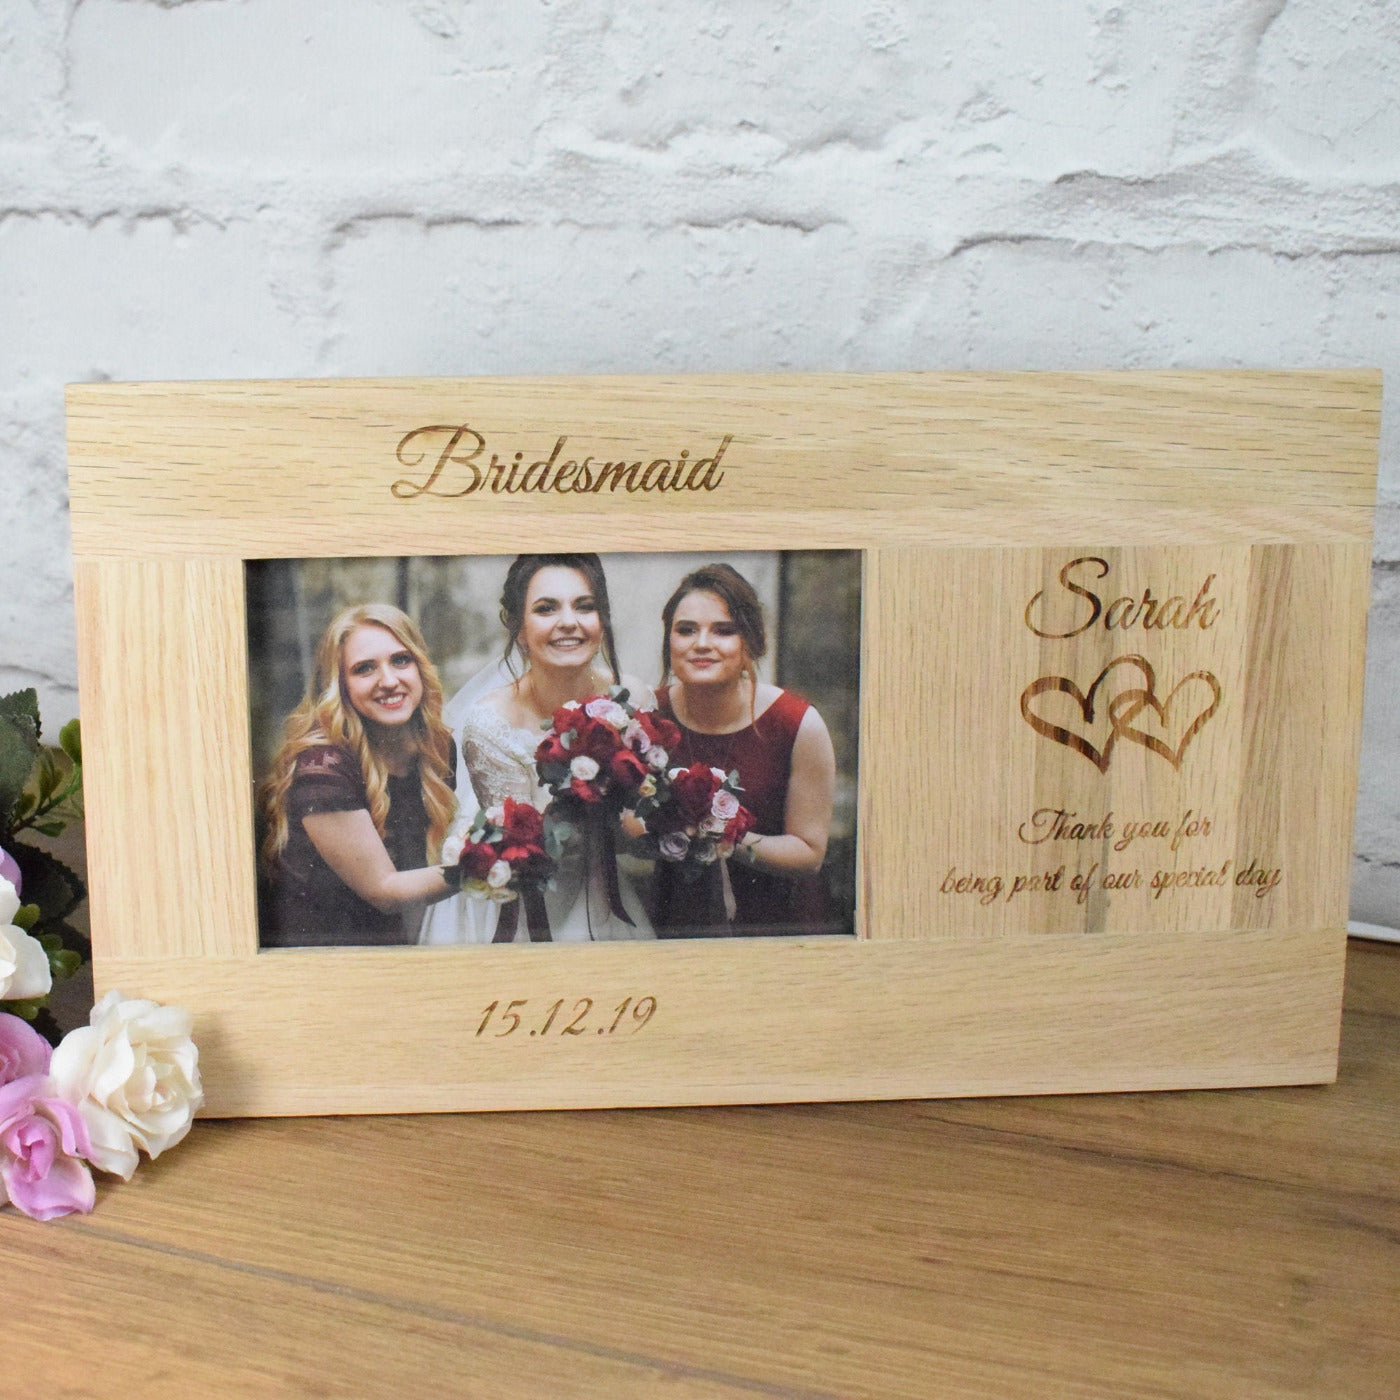 Bridesmaid Frame, Maid of Honour Picture Frame, Bridesmaid Picture Frame, Personalised Bridesmaid Frame, Bridesmaid Photo, Wood Picture Frame